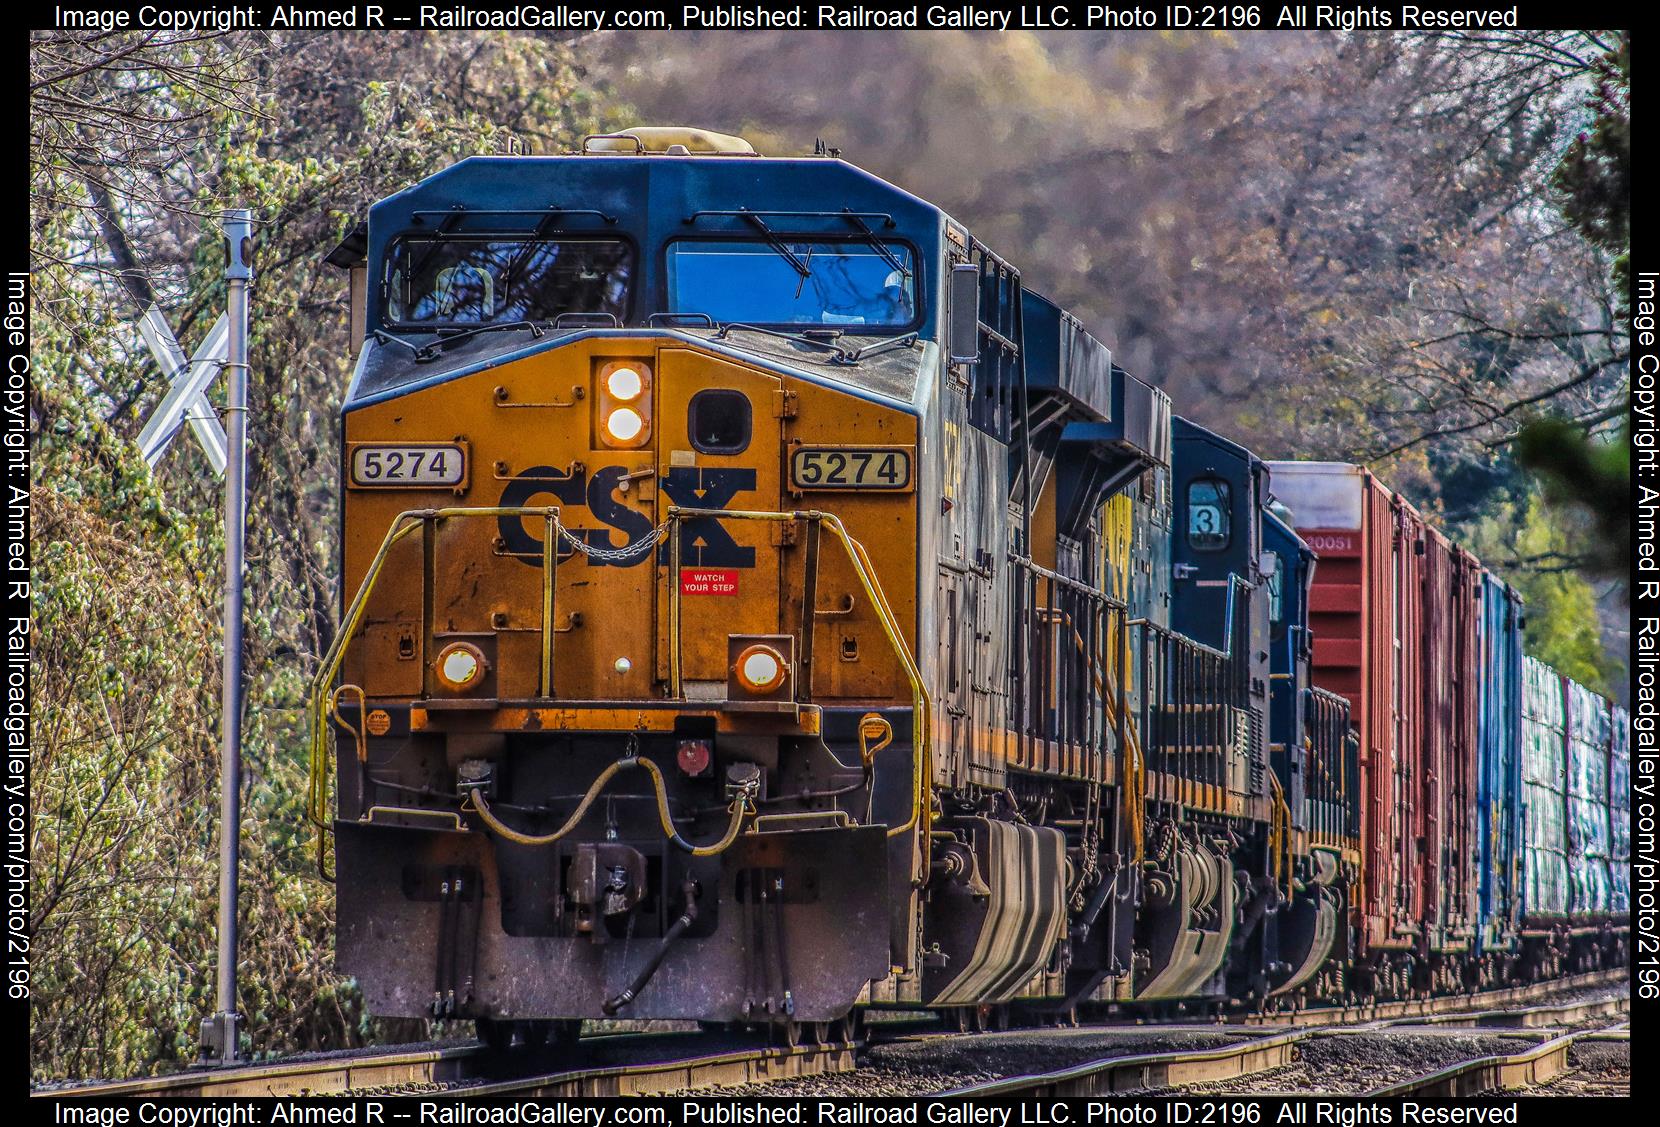 CSX 5274 is a class GE ES40DC and  is pictured in Garett Park, Maryland, USA.  This was taken along the CSX Metropolitan Subdivision on the CSX Transportation. Photo Copyright: Ahmed R uploaded to Railroad Gallery on 07/05/2023. This photograph of CSX 5274 was taken on Thursday, November 24, 2022. All Rights Reserved. 